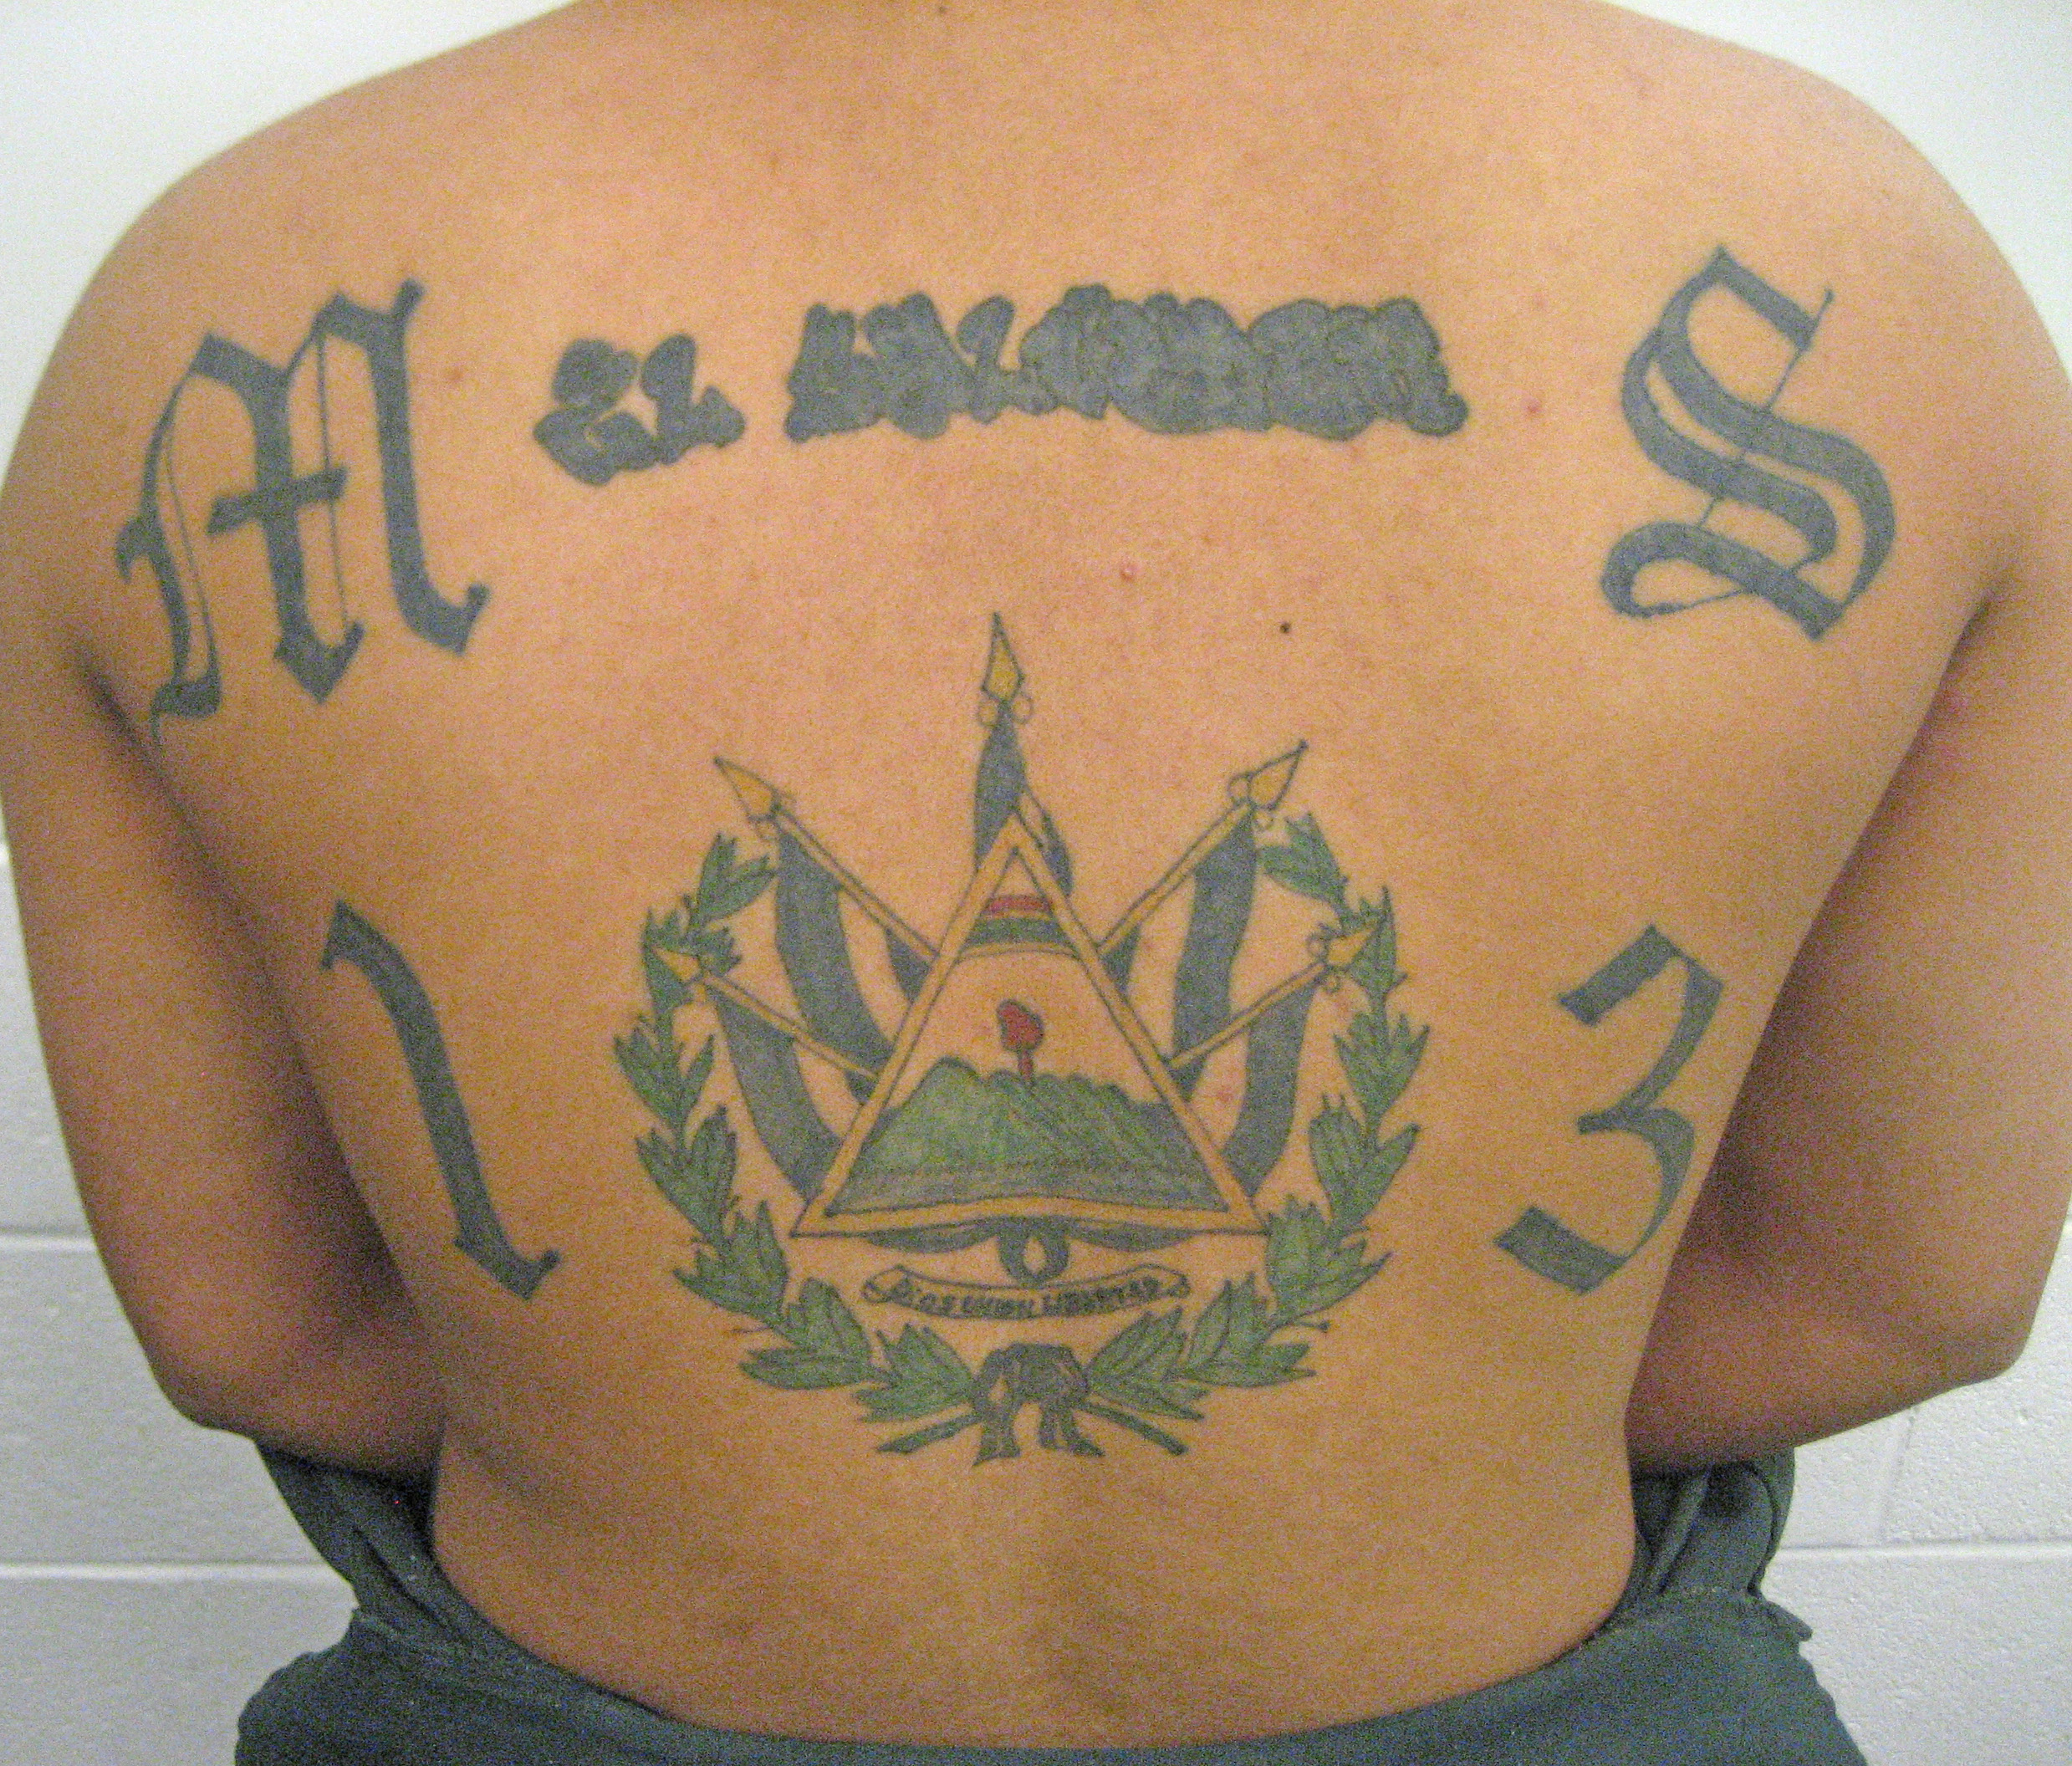 MS-13 Gang Leader Charged with Authorizing Two Murders in MA